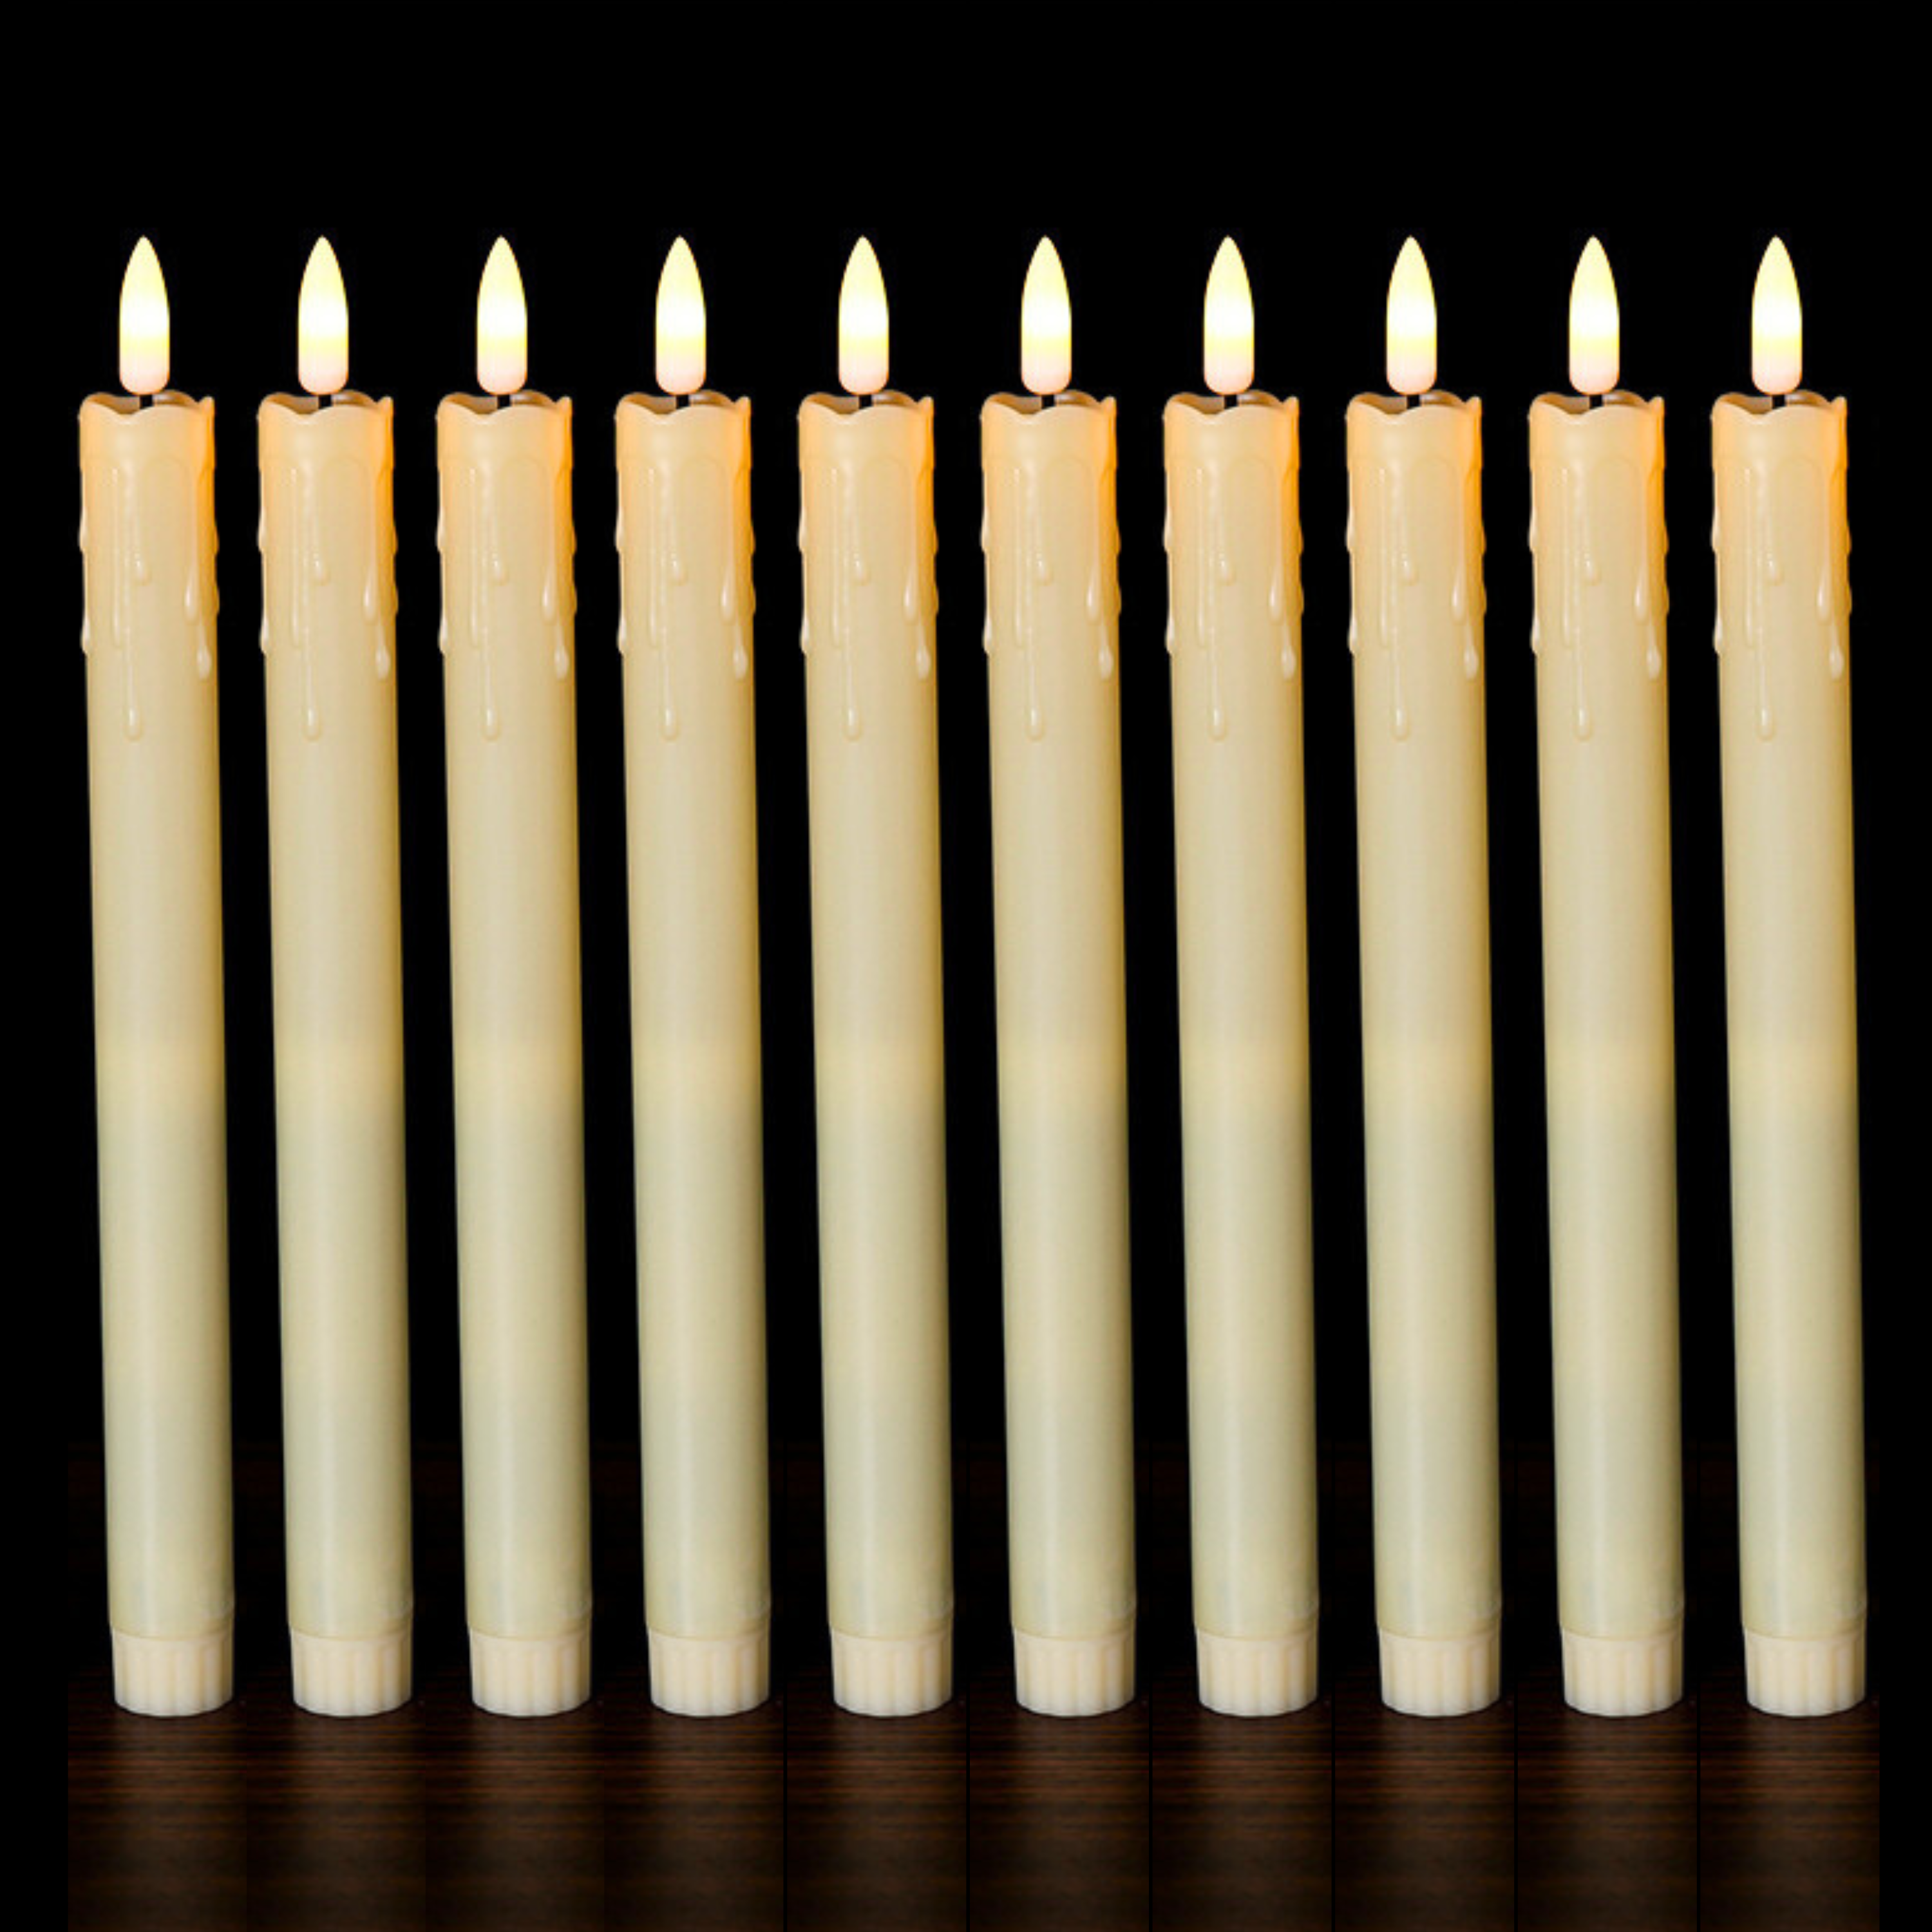 Flameless Ivory Taper Candles Flickering, Bulk Pack of 30 pcs, Battery Operated Led Warm 3D Wick Light Dripping Wax Candles, Christmas Home Wedding Decor(0.78 X 9.64 Inch)